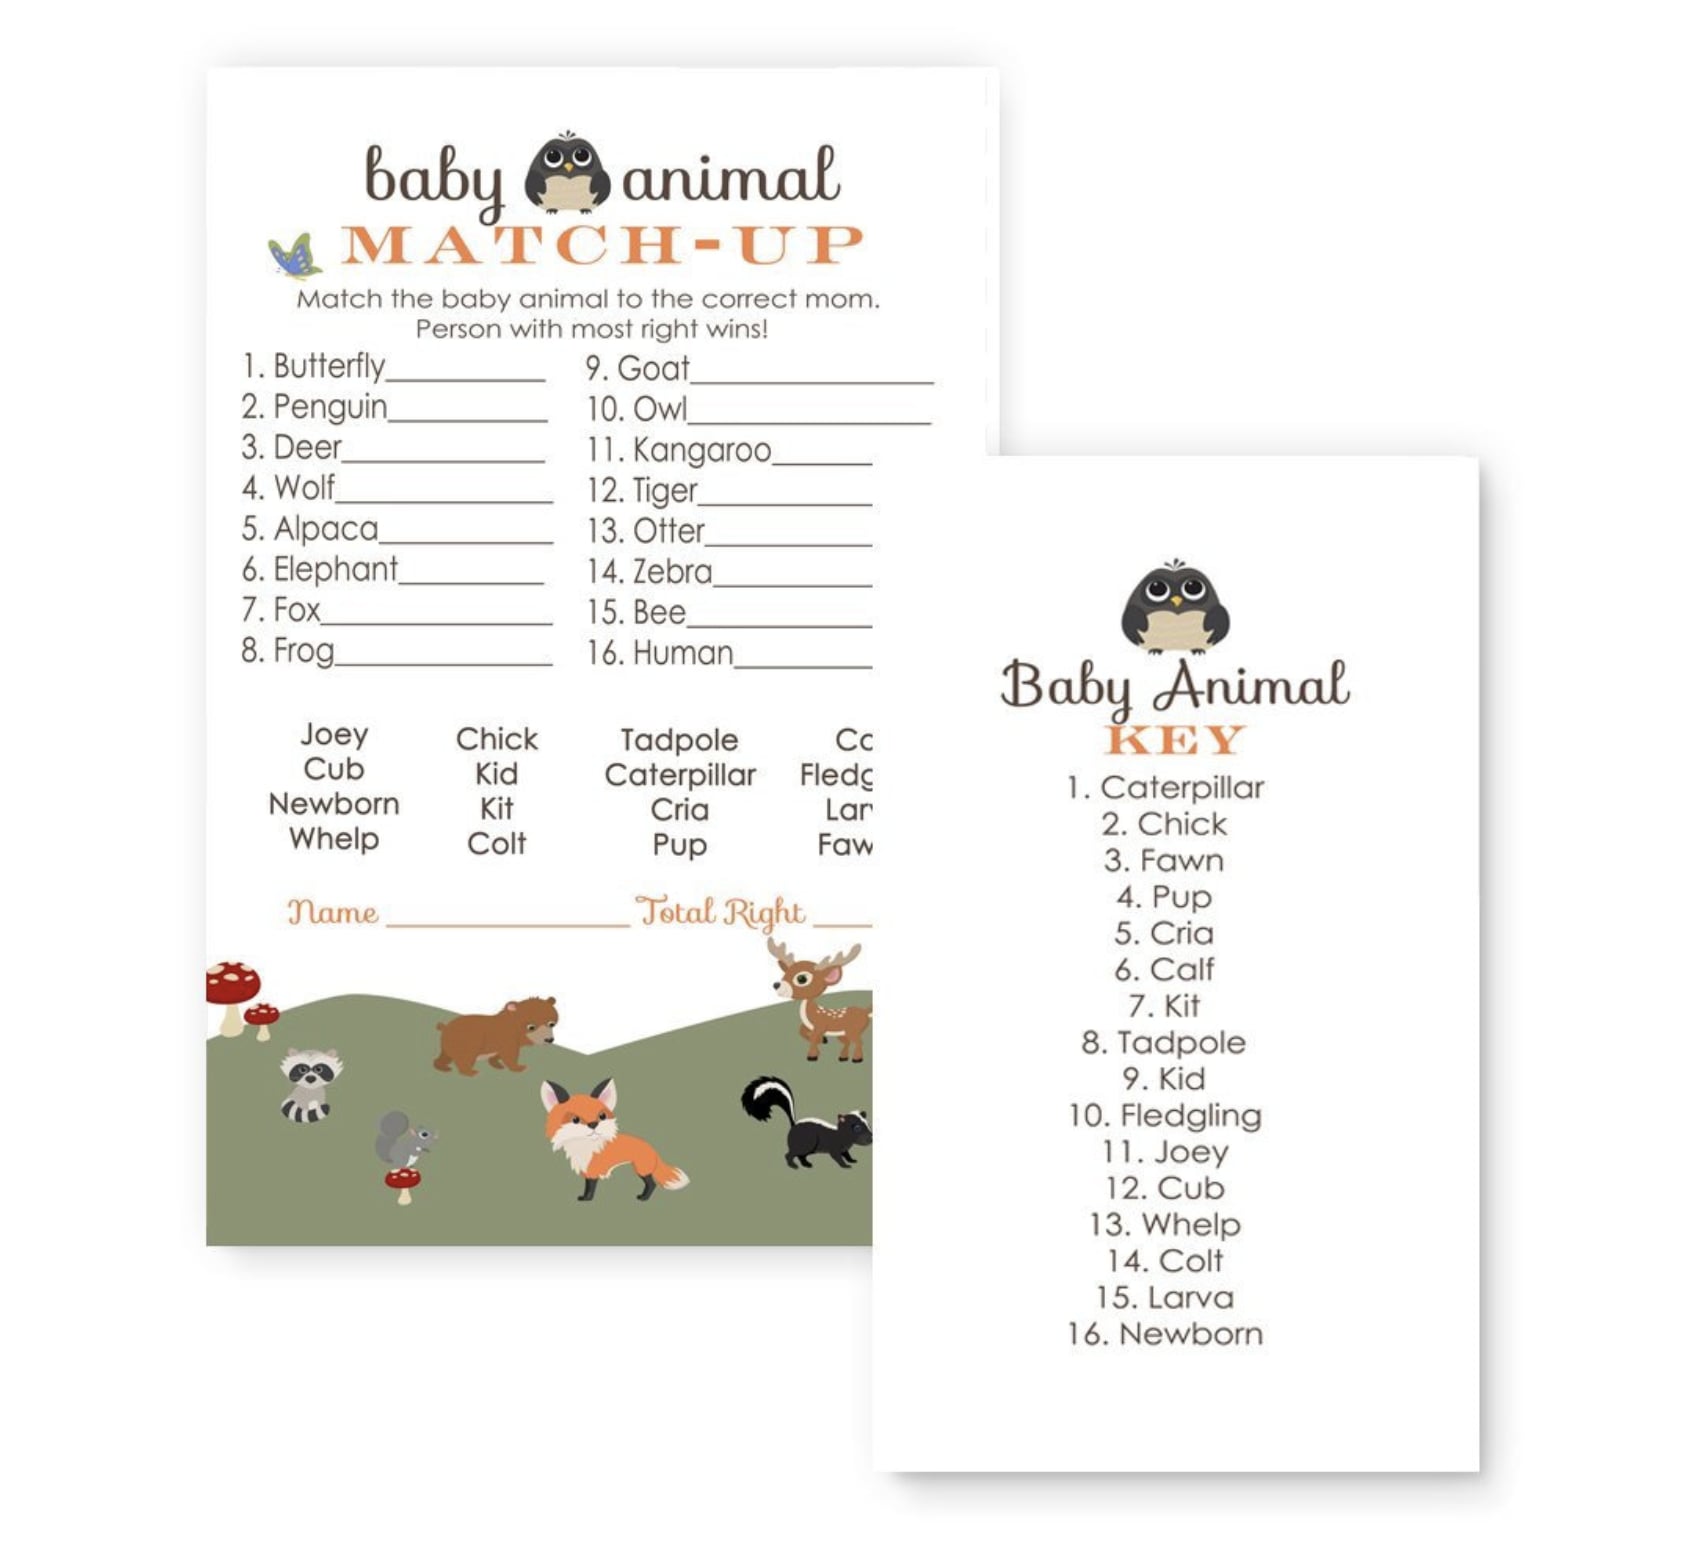 Baby Animal Match Up 21 Fun Baby Shower Games Your Guests Will Actually Want To Play Popsugar Family Photo 17